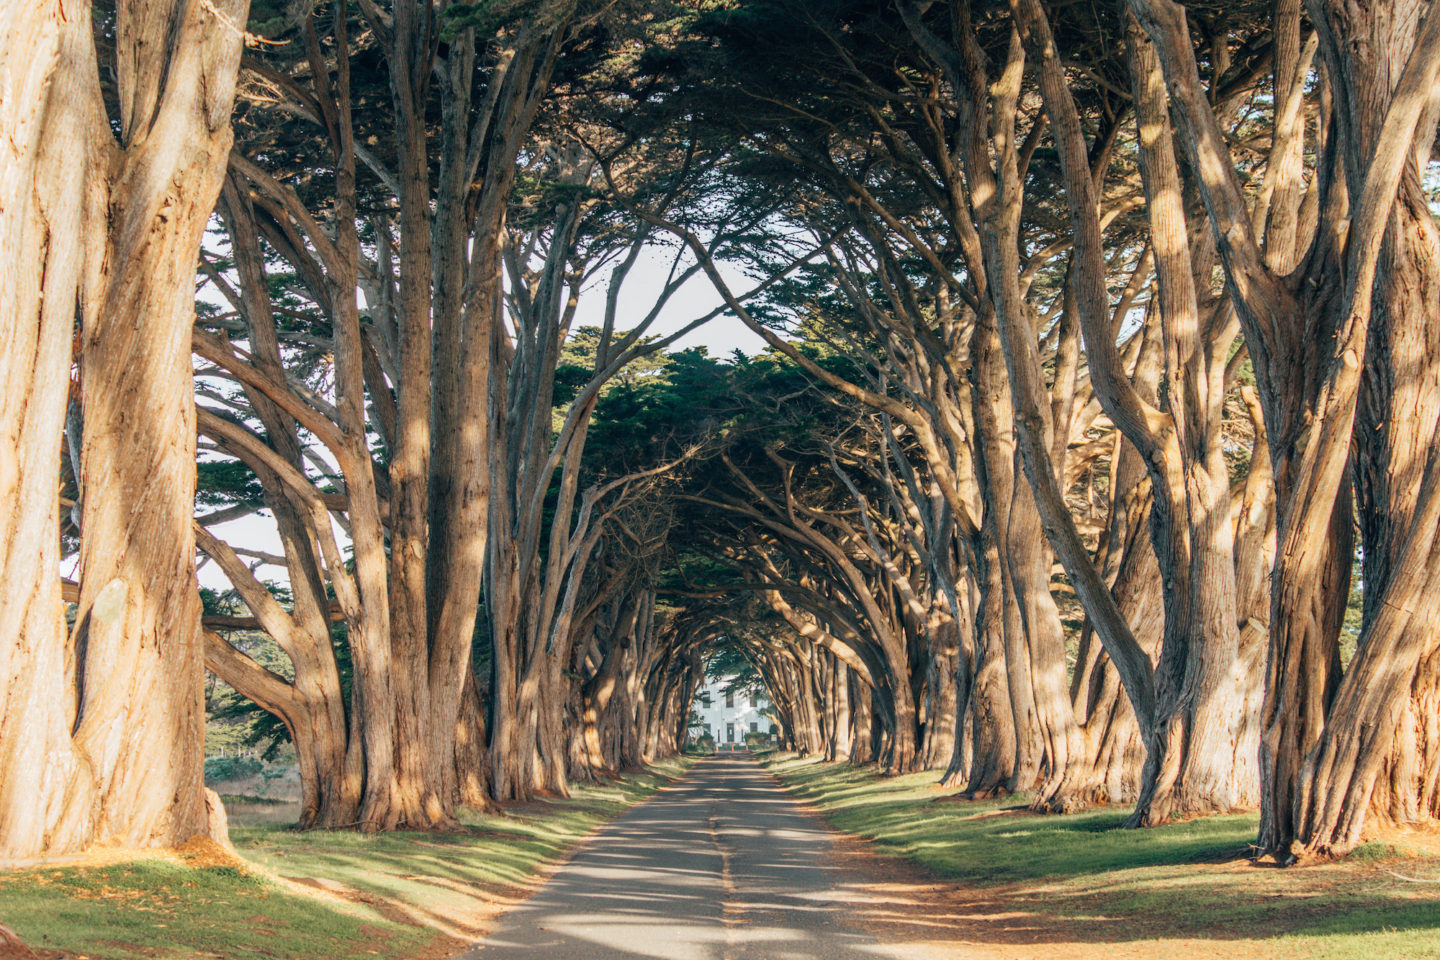 Point Reyes Cypress Tree Tunnel - Point Reyes, CA